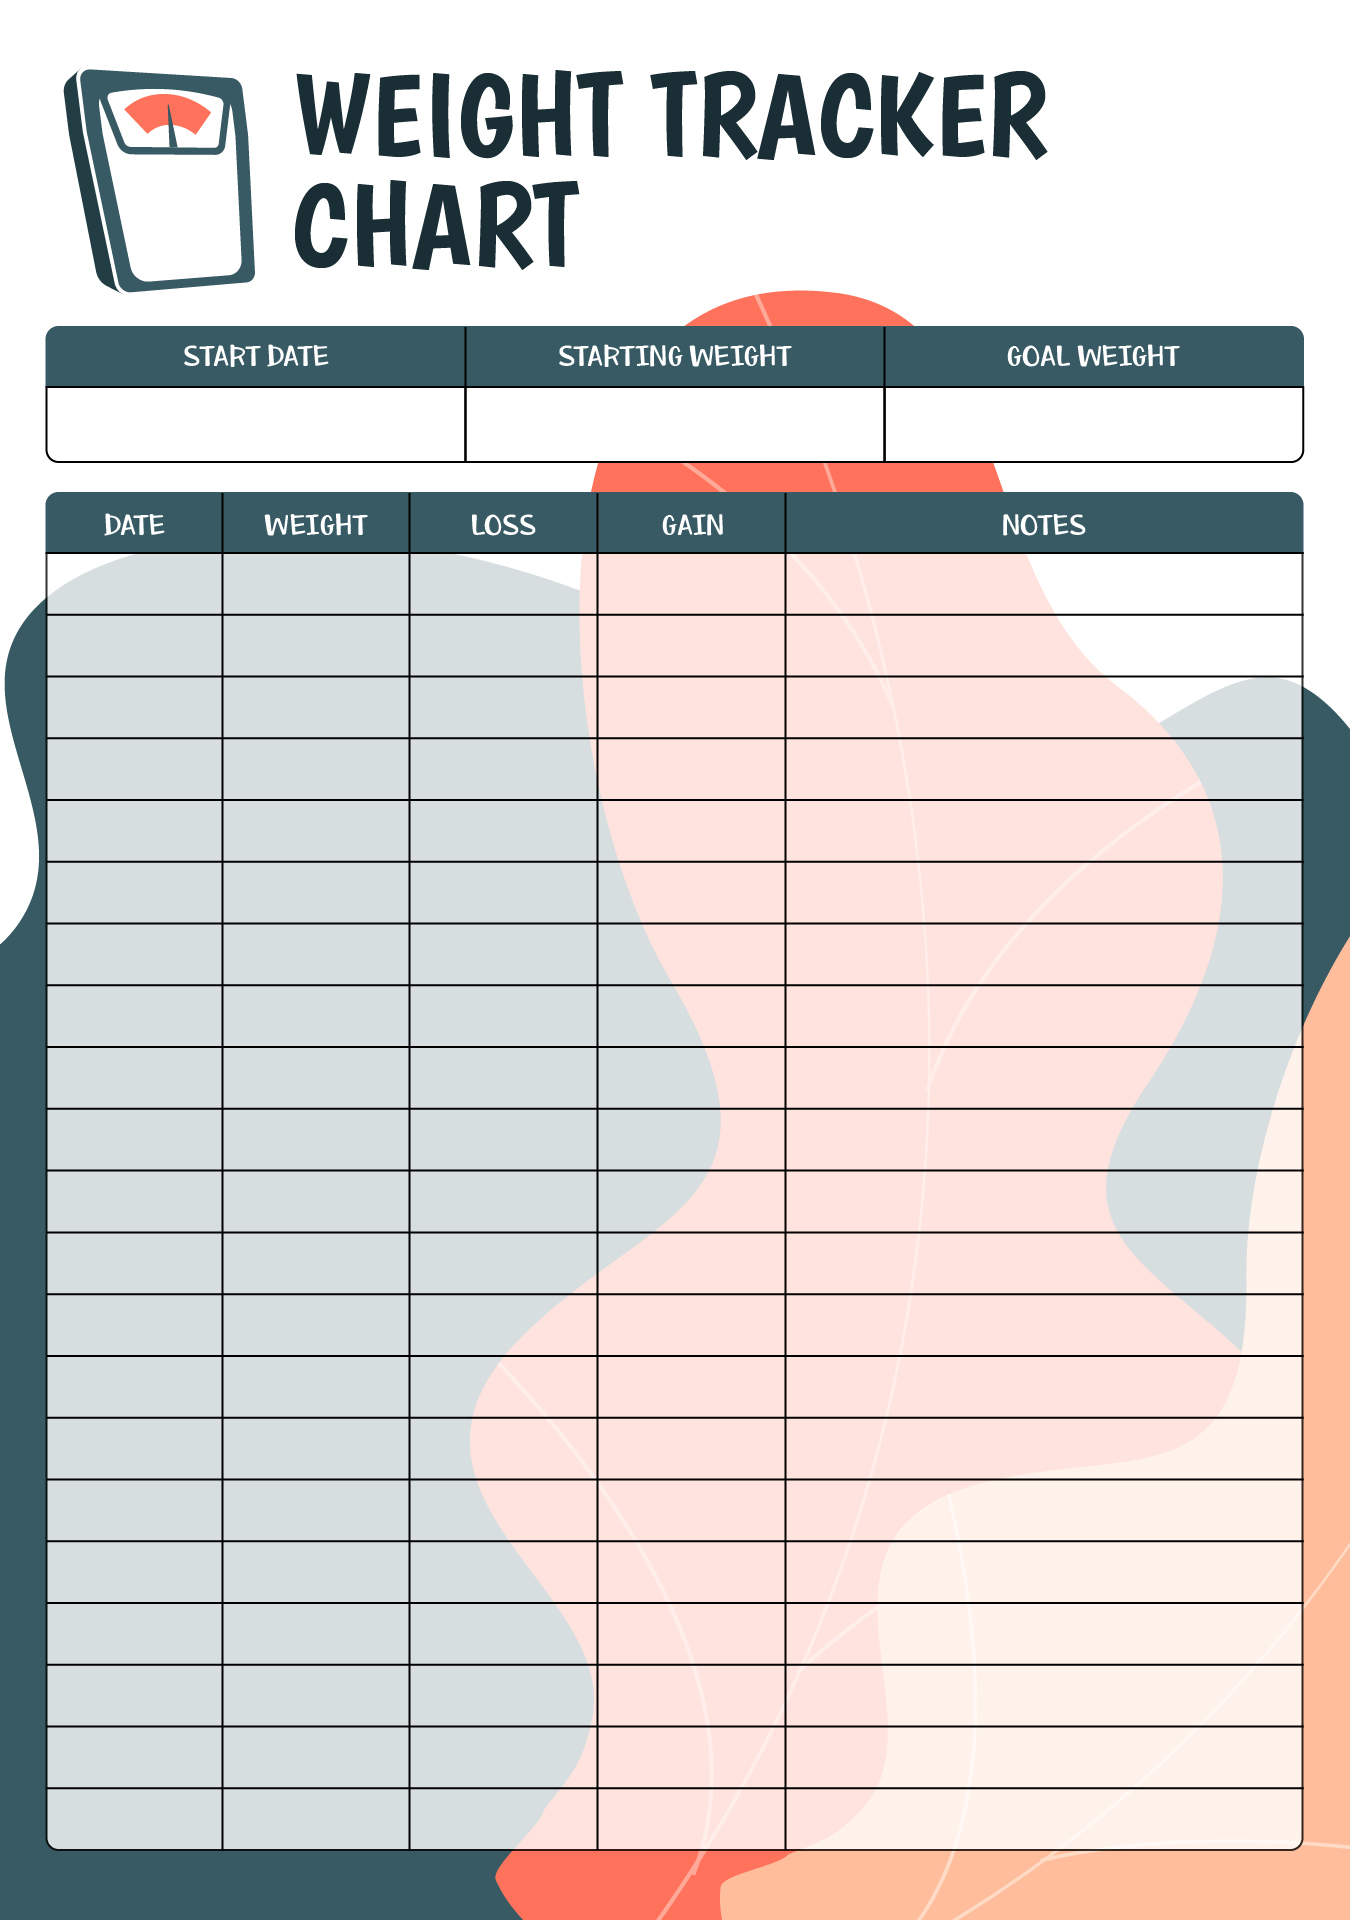 7-best-images-of-weight-loss-tracker-printable-free-printable-weight-tracker-chart-free